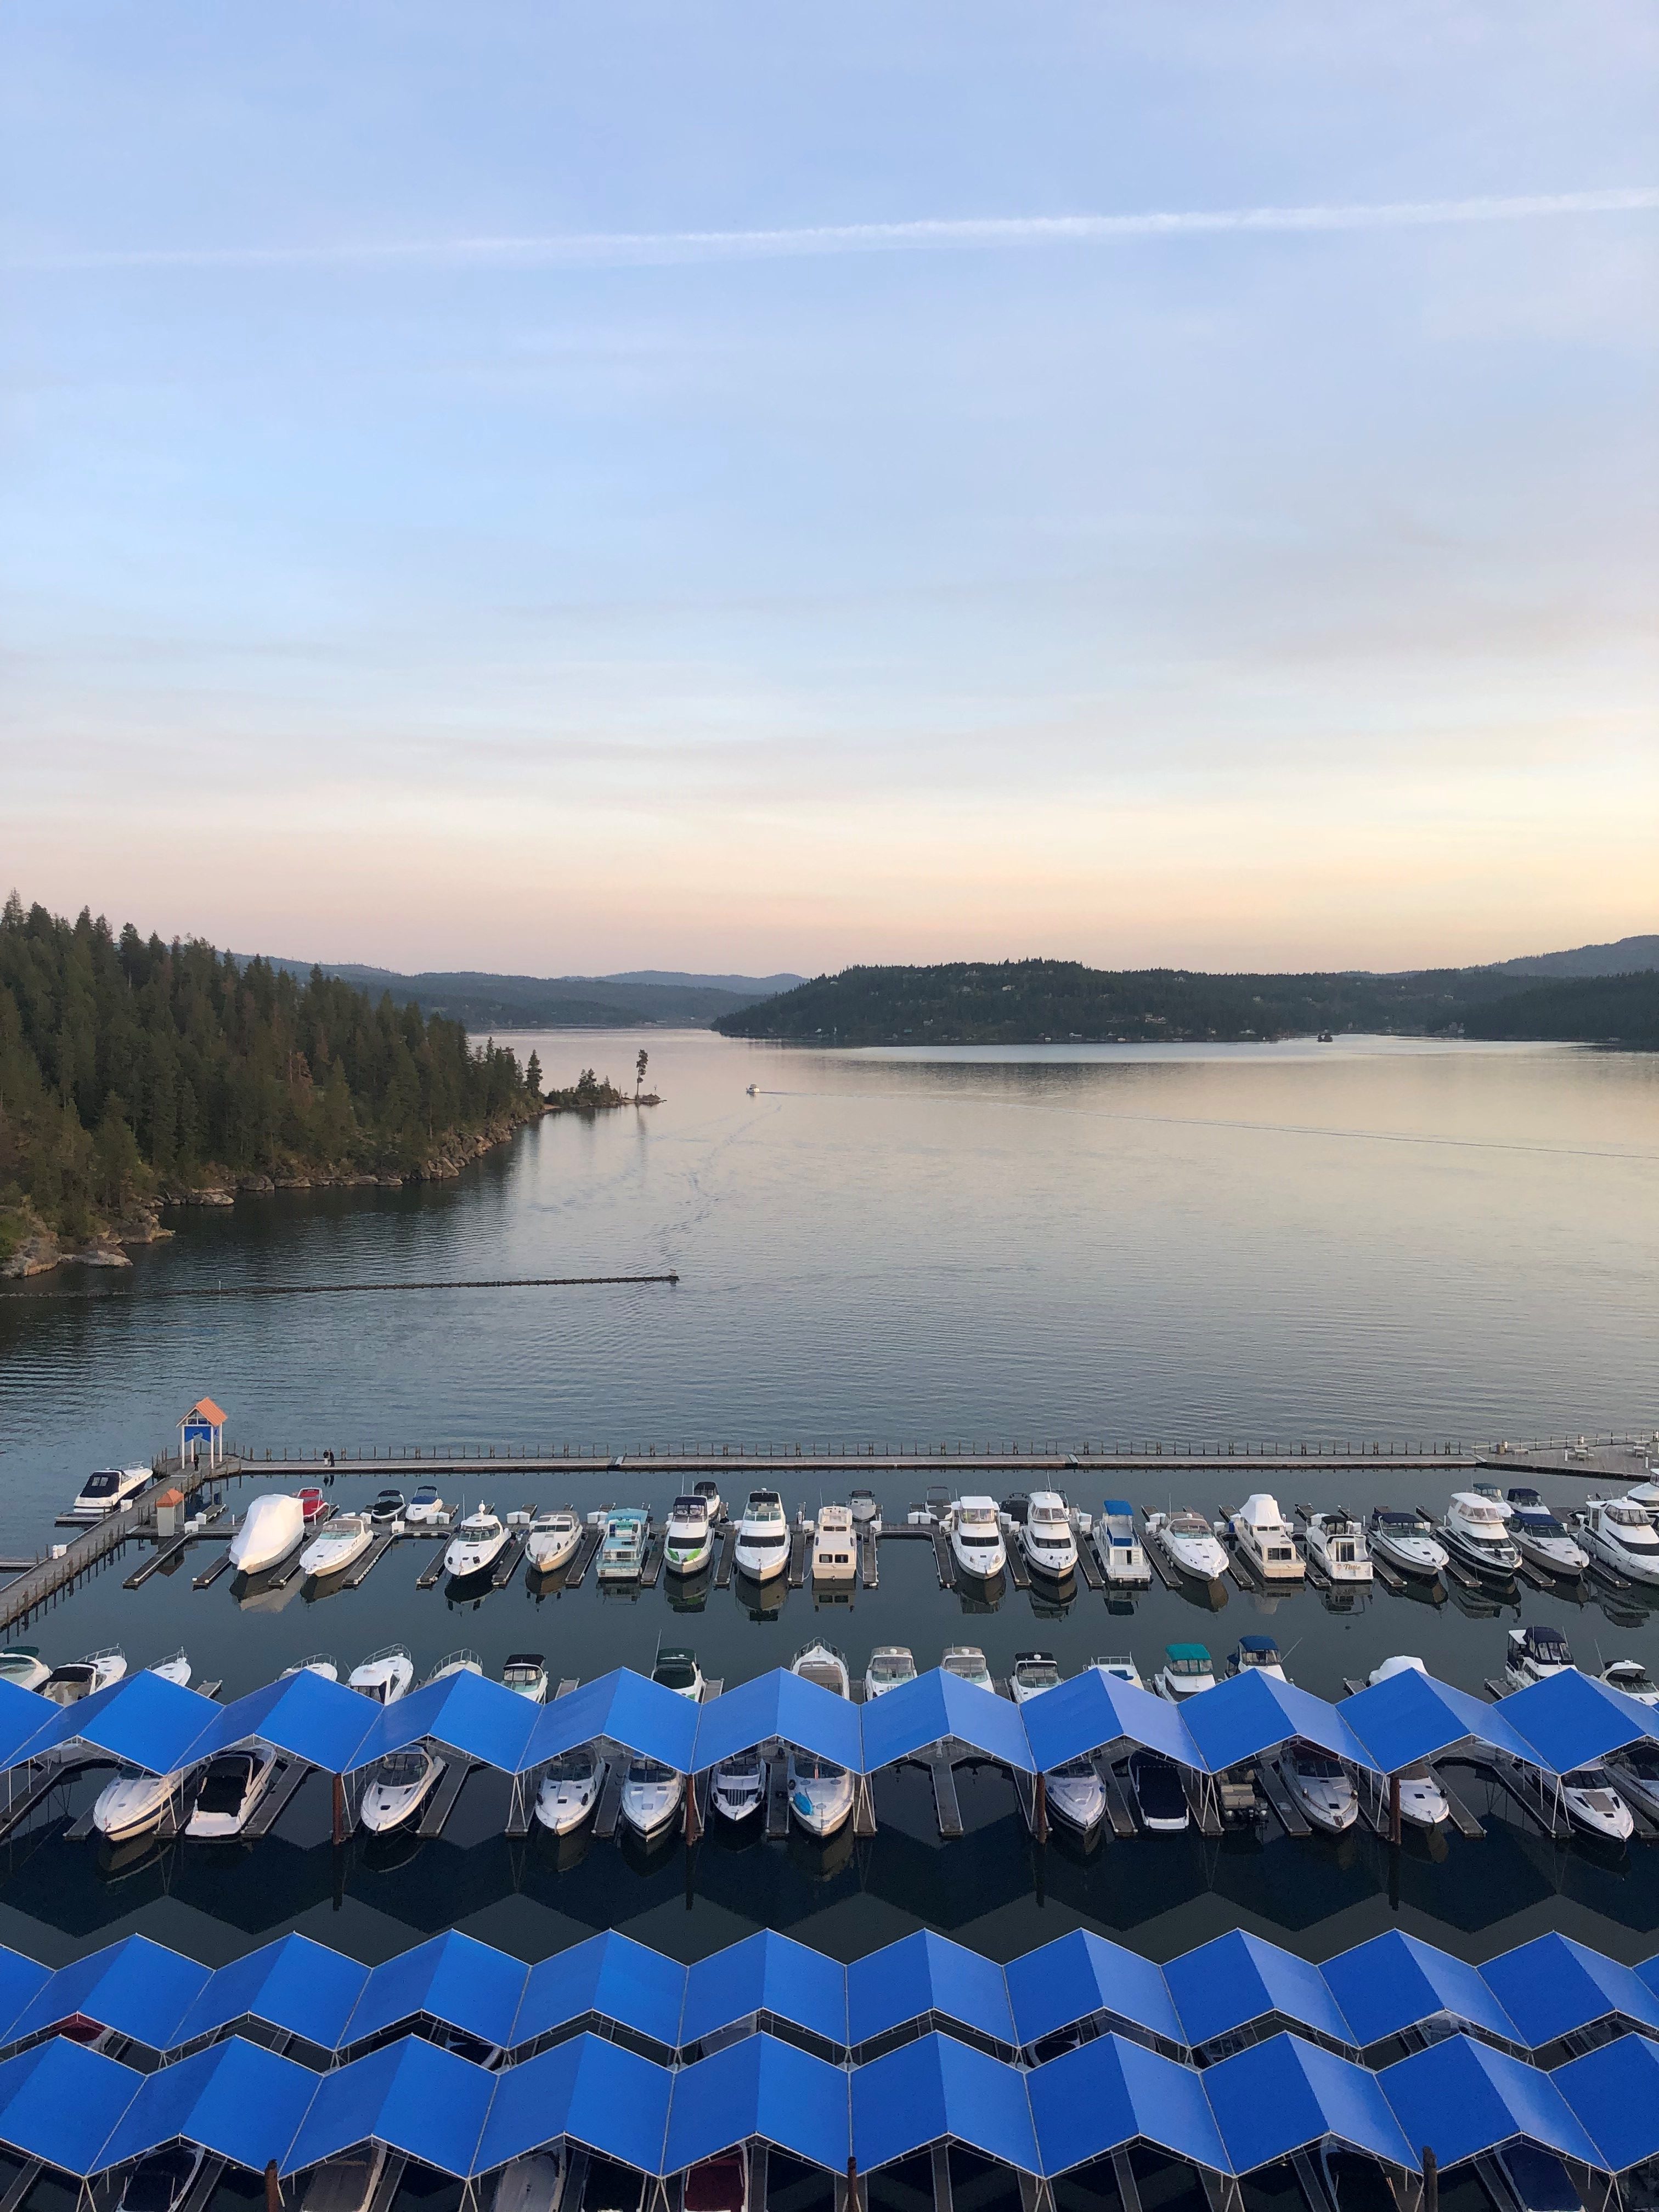 view from our room at the CDA resort